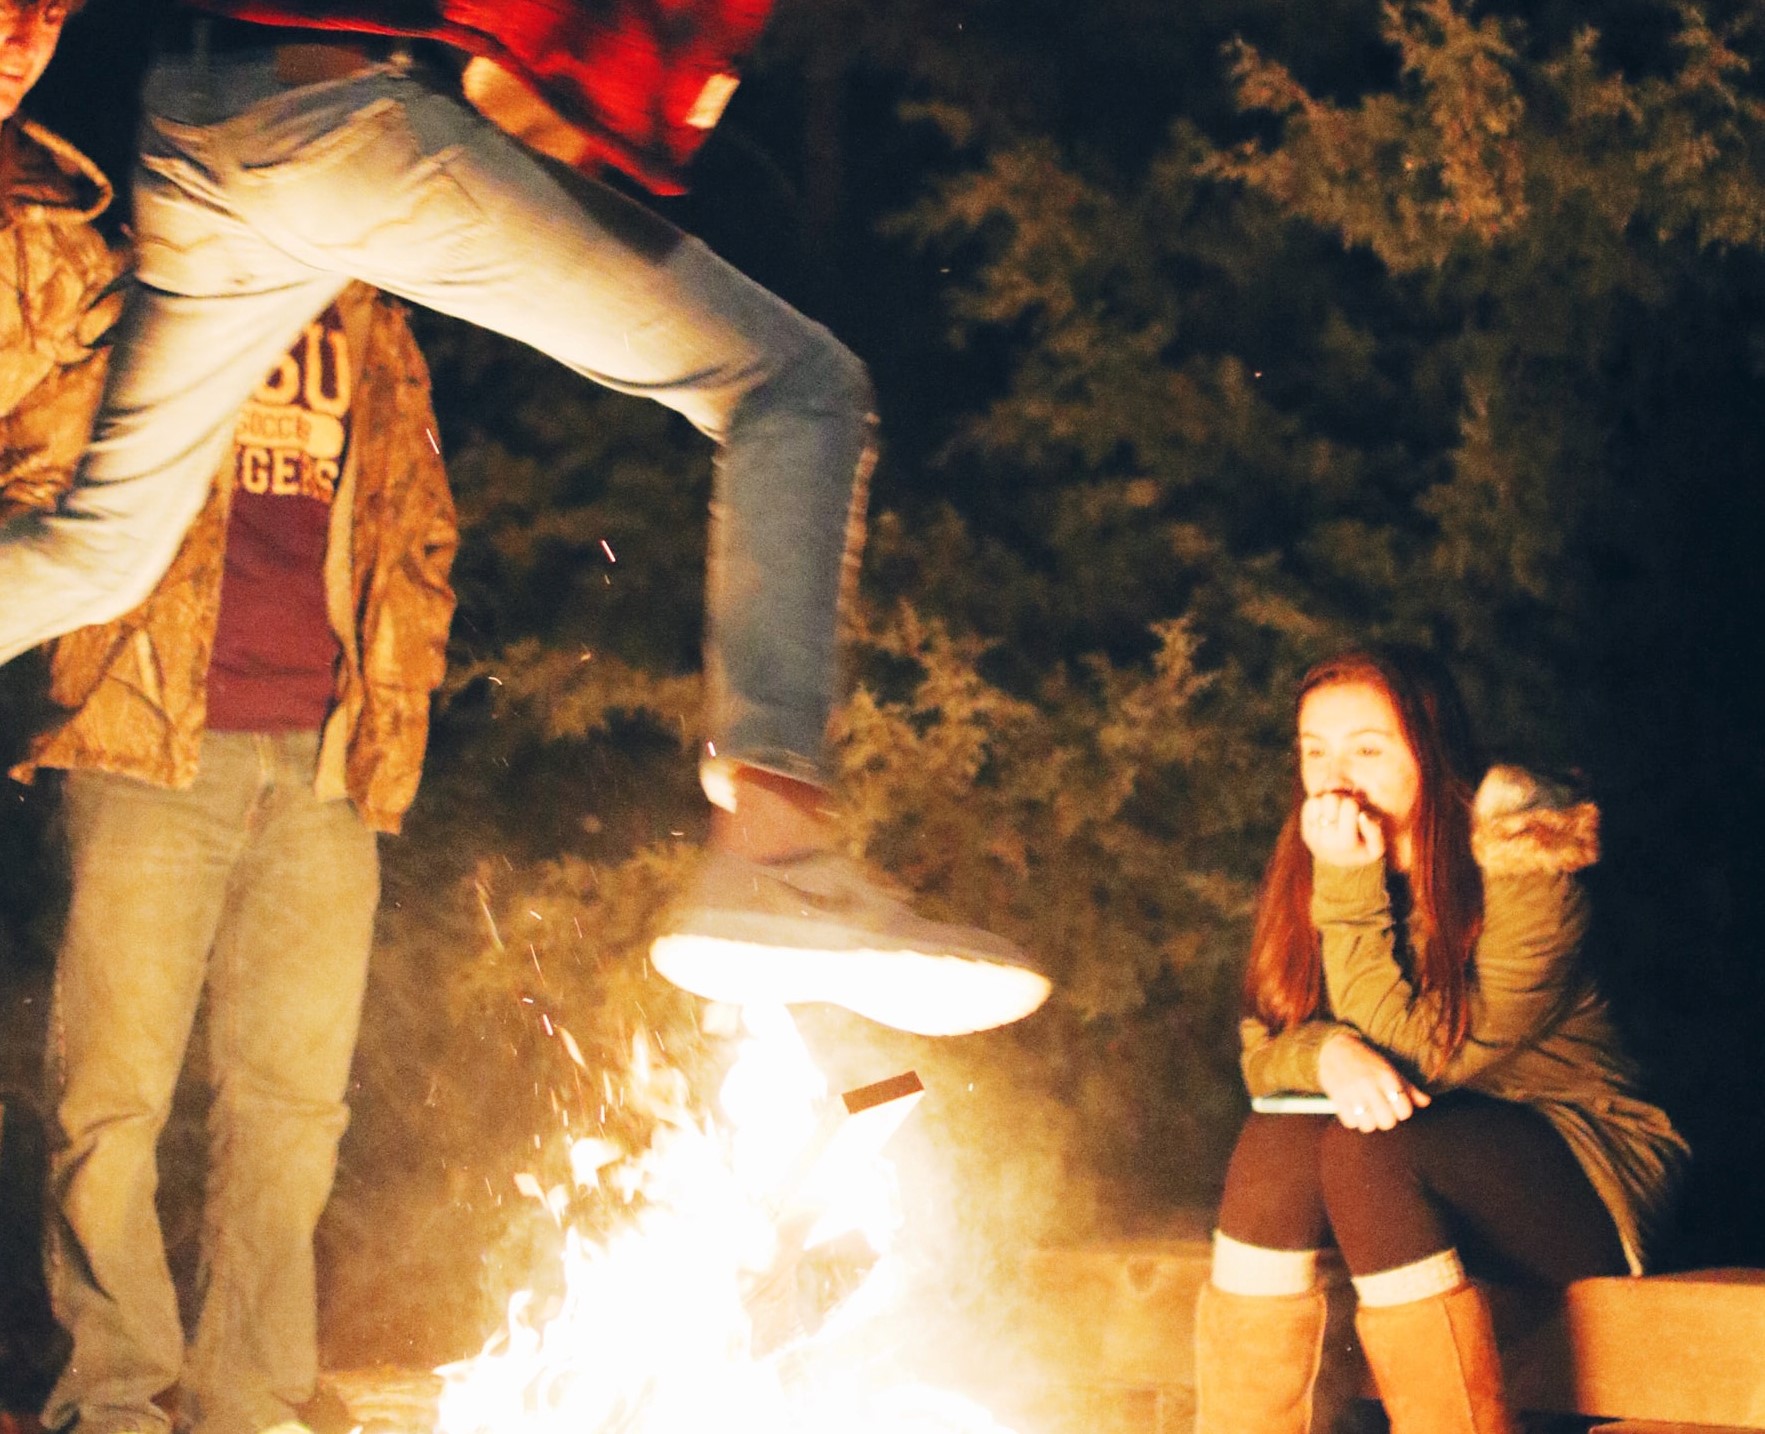 Jumping over fire